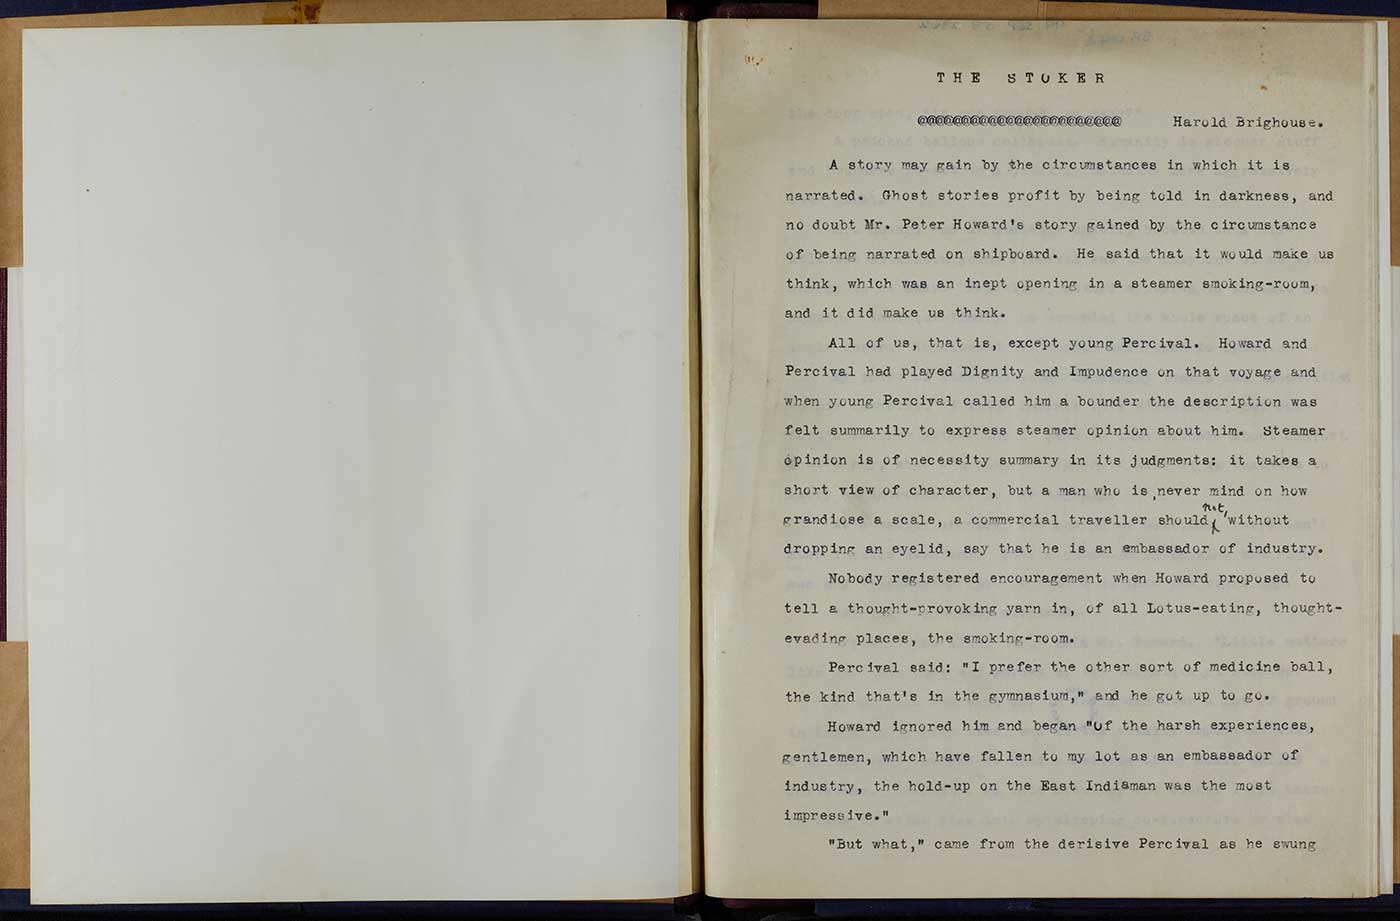 The first page of The Stoker